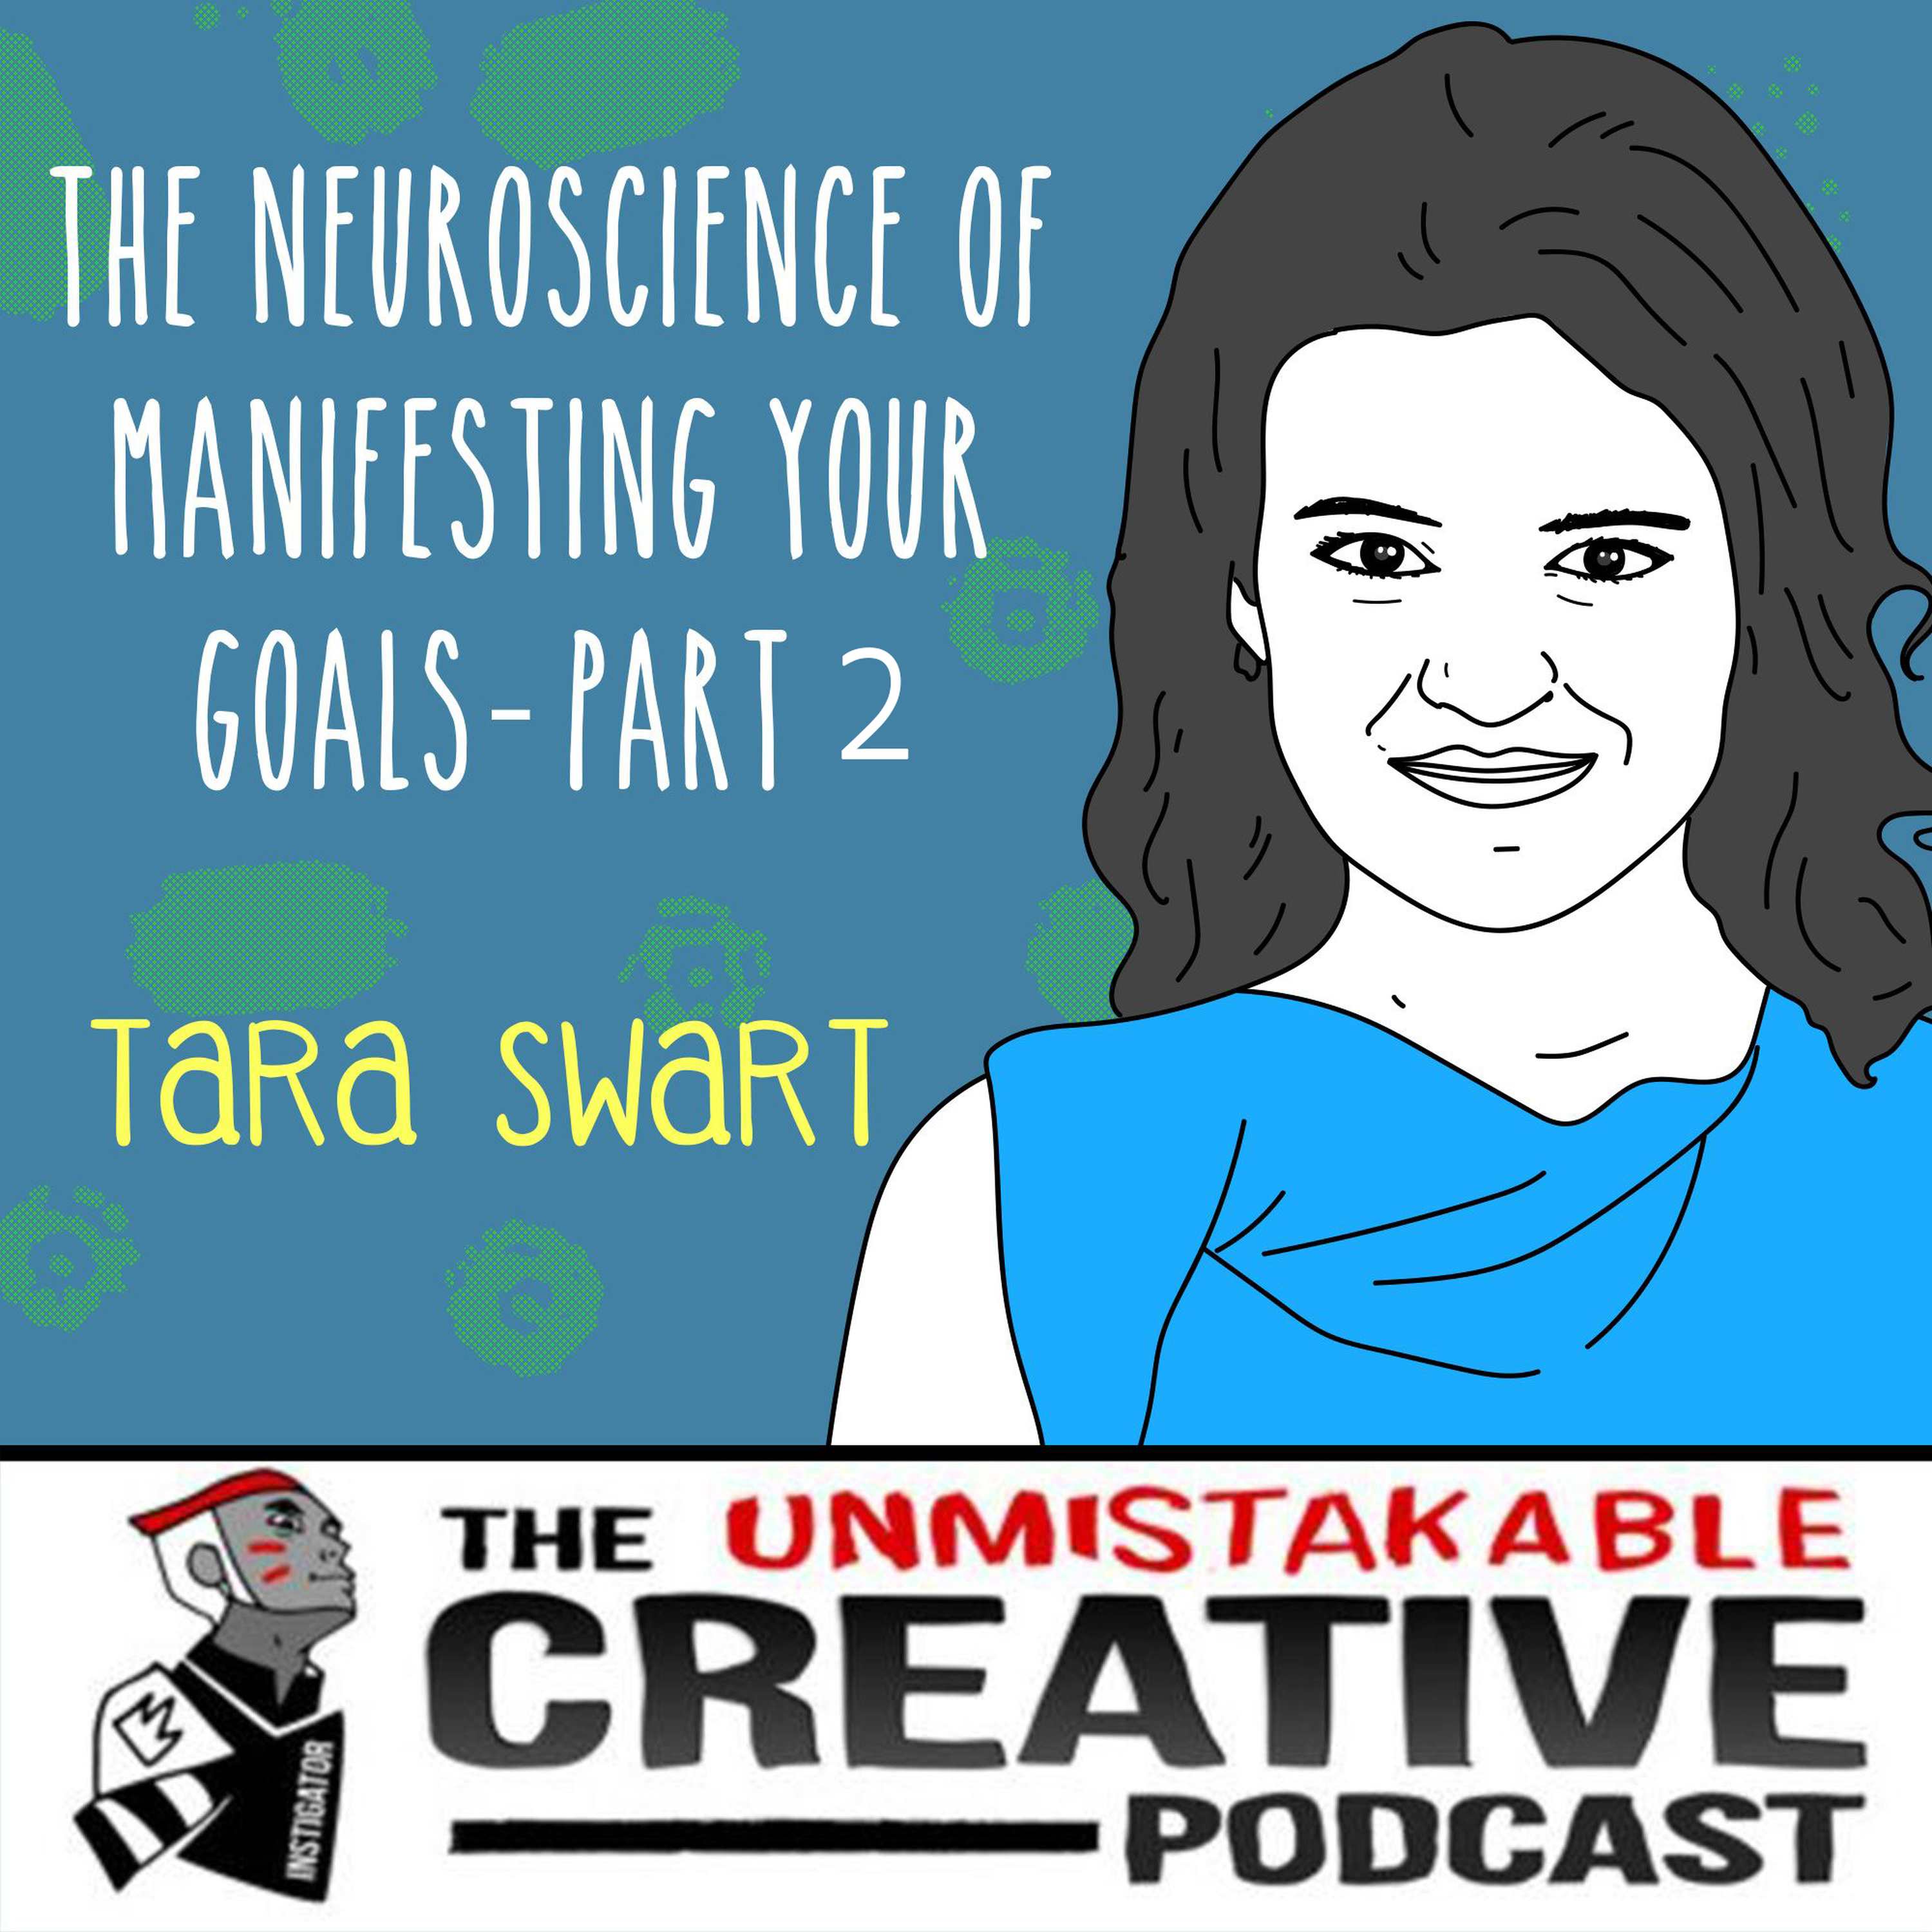 Unmistakable Classics: Tara Swart | The Neuroscience of Manifesting Your Goals - Part 2 Image